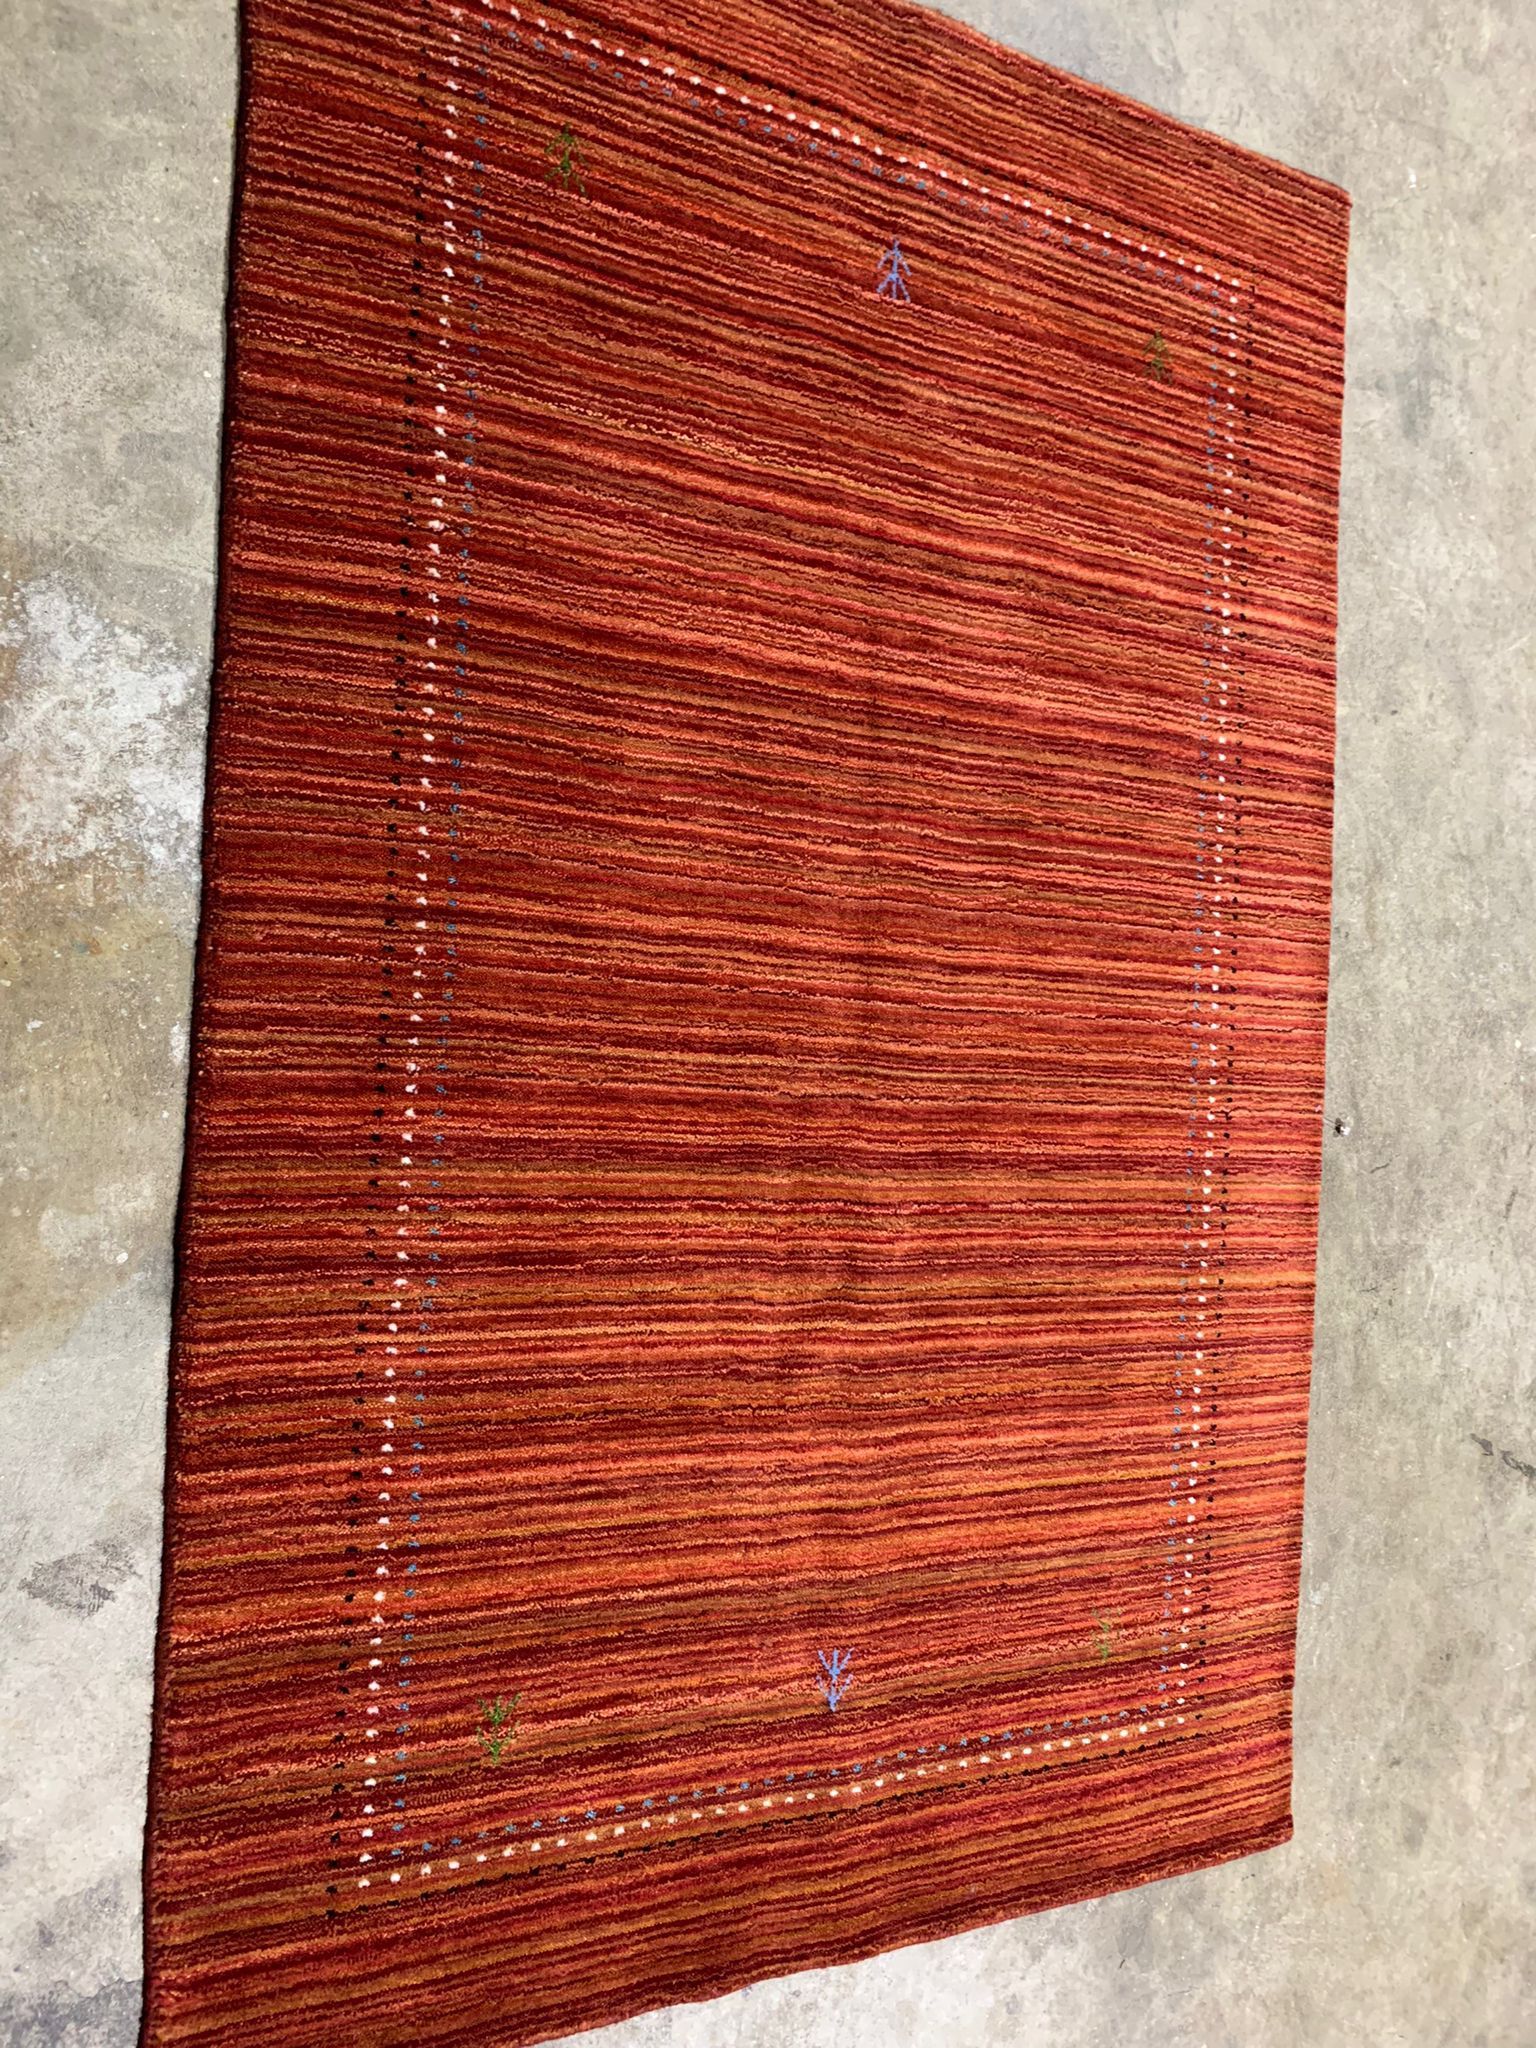 4.8x6.7 hand made gabbeh rug never been used